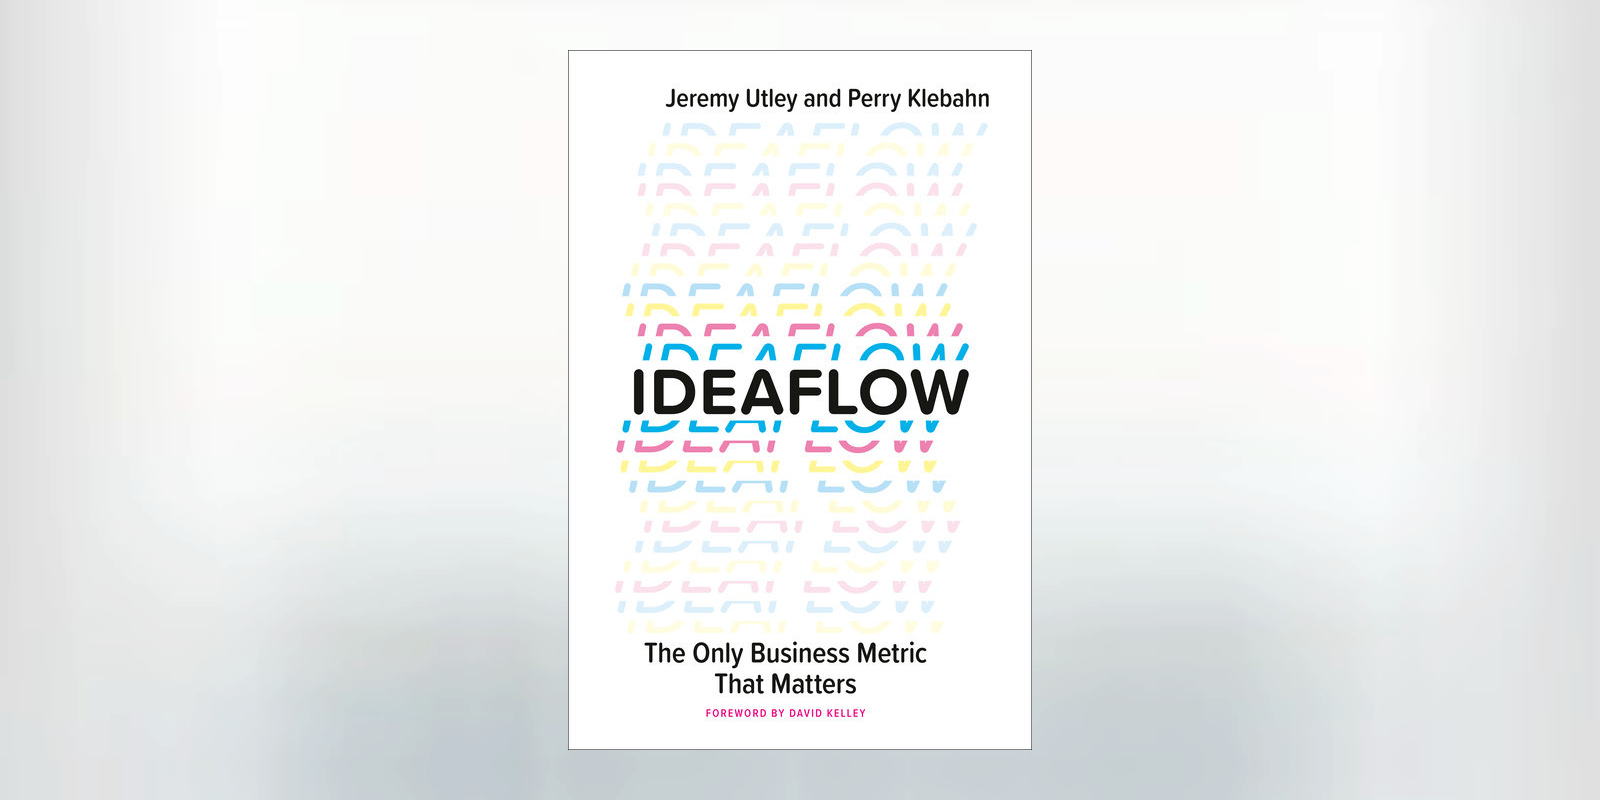 <i>Ideaflow: The Only Business Metric That Matters</i> with Jeremy Utley and Perry Klebahn